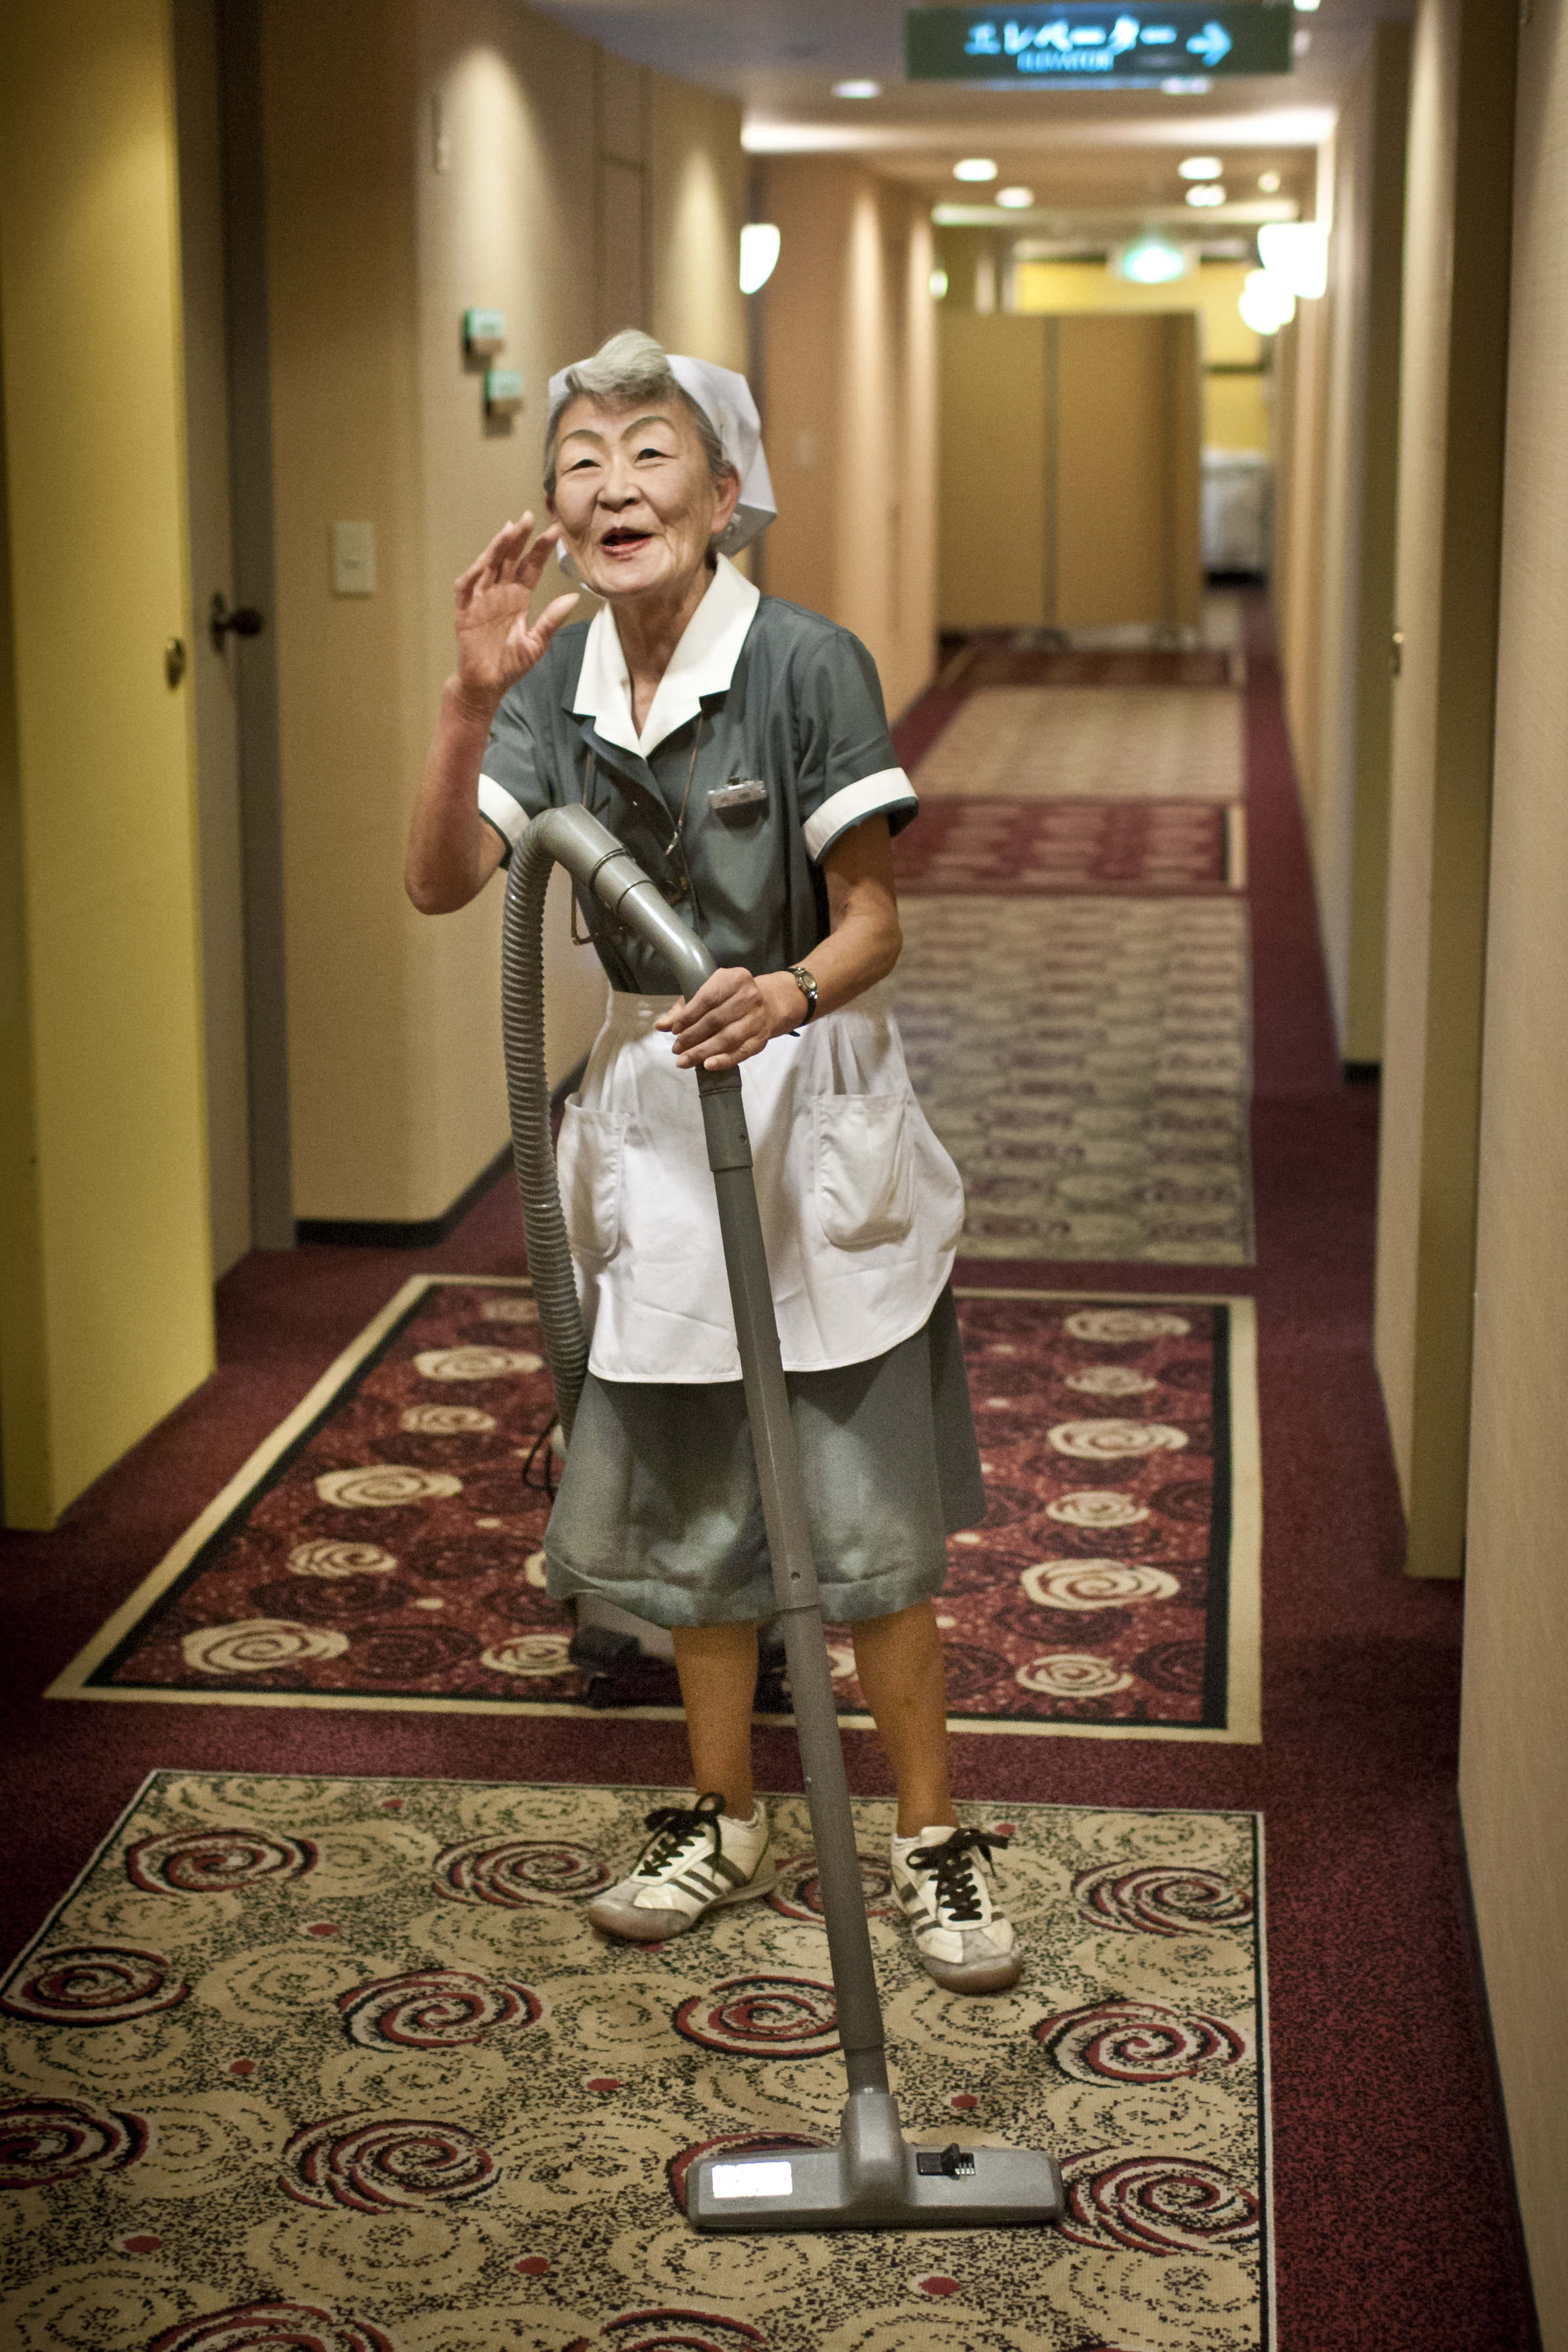 A hotel maid in hallway in Japan